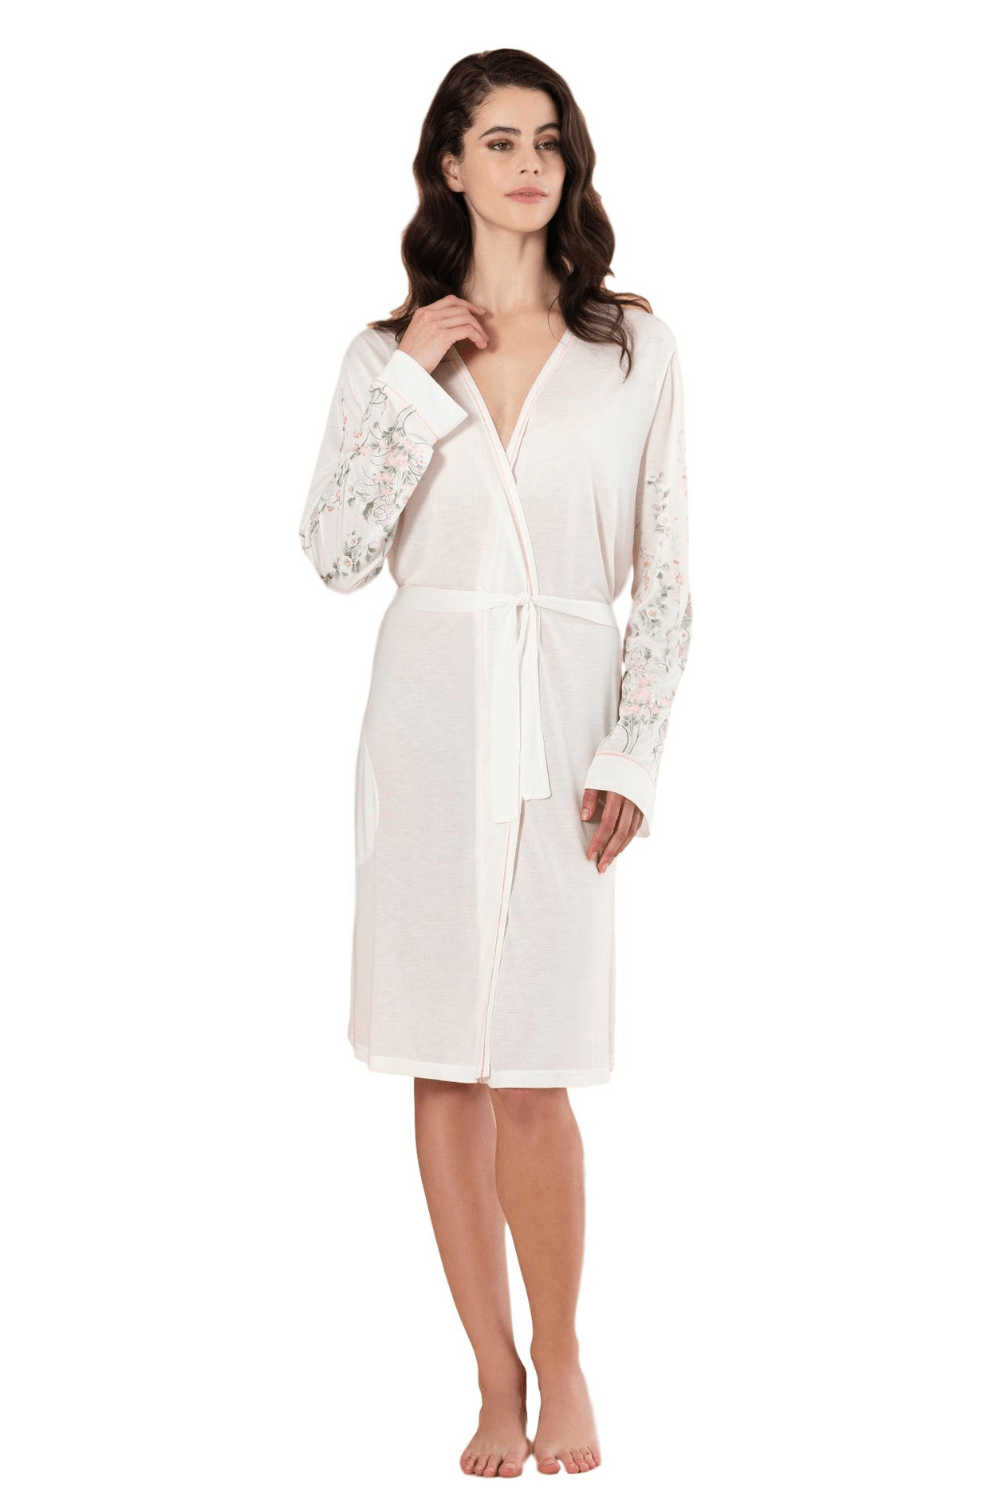 Cyberjammies Cosmo Jersey Modal Long Dressing Gown